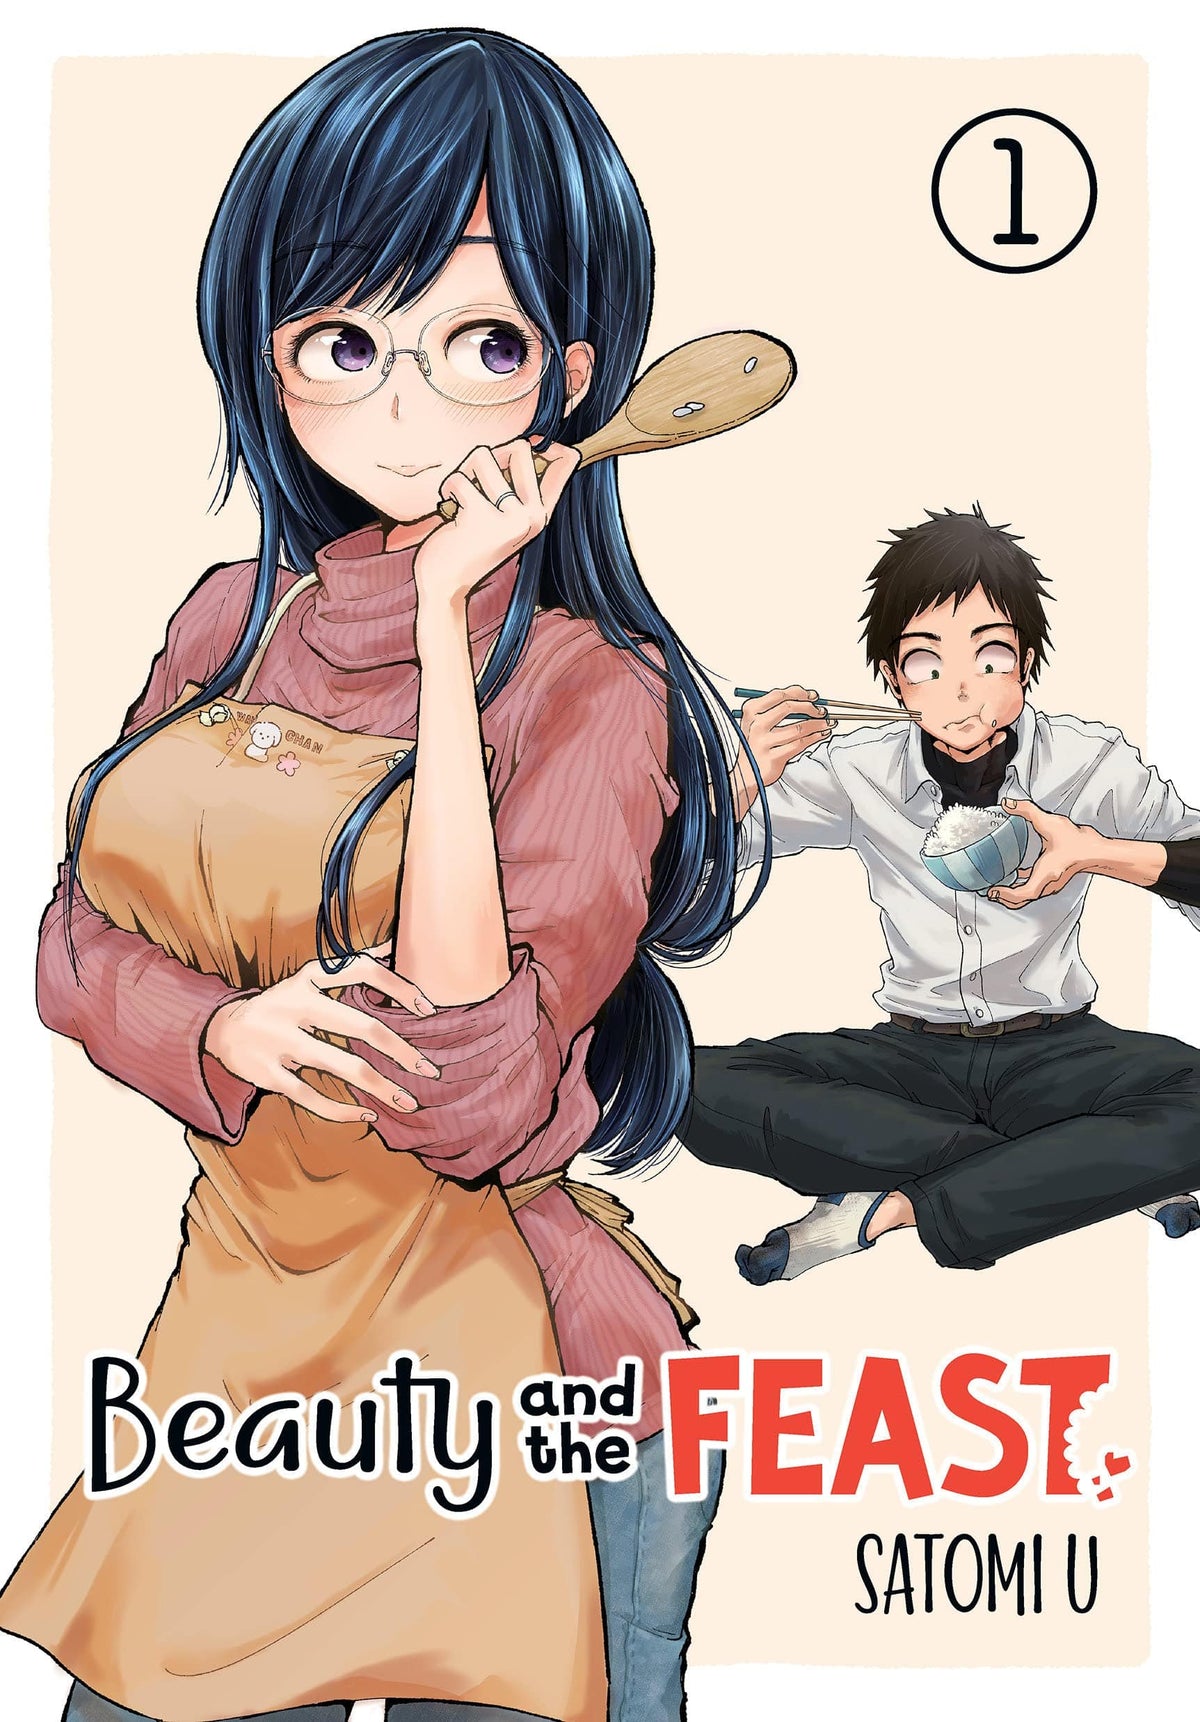 Beauty and the Feast Vol. 1 - Third Eye